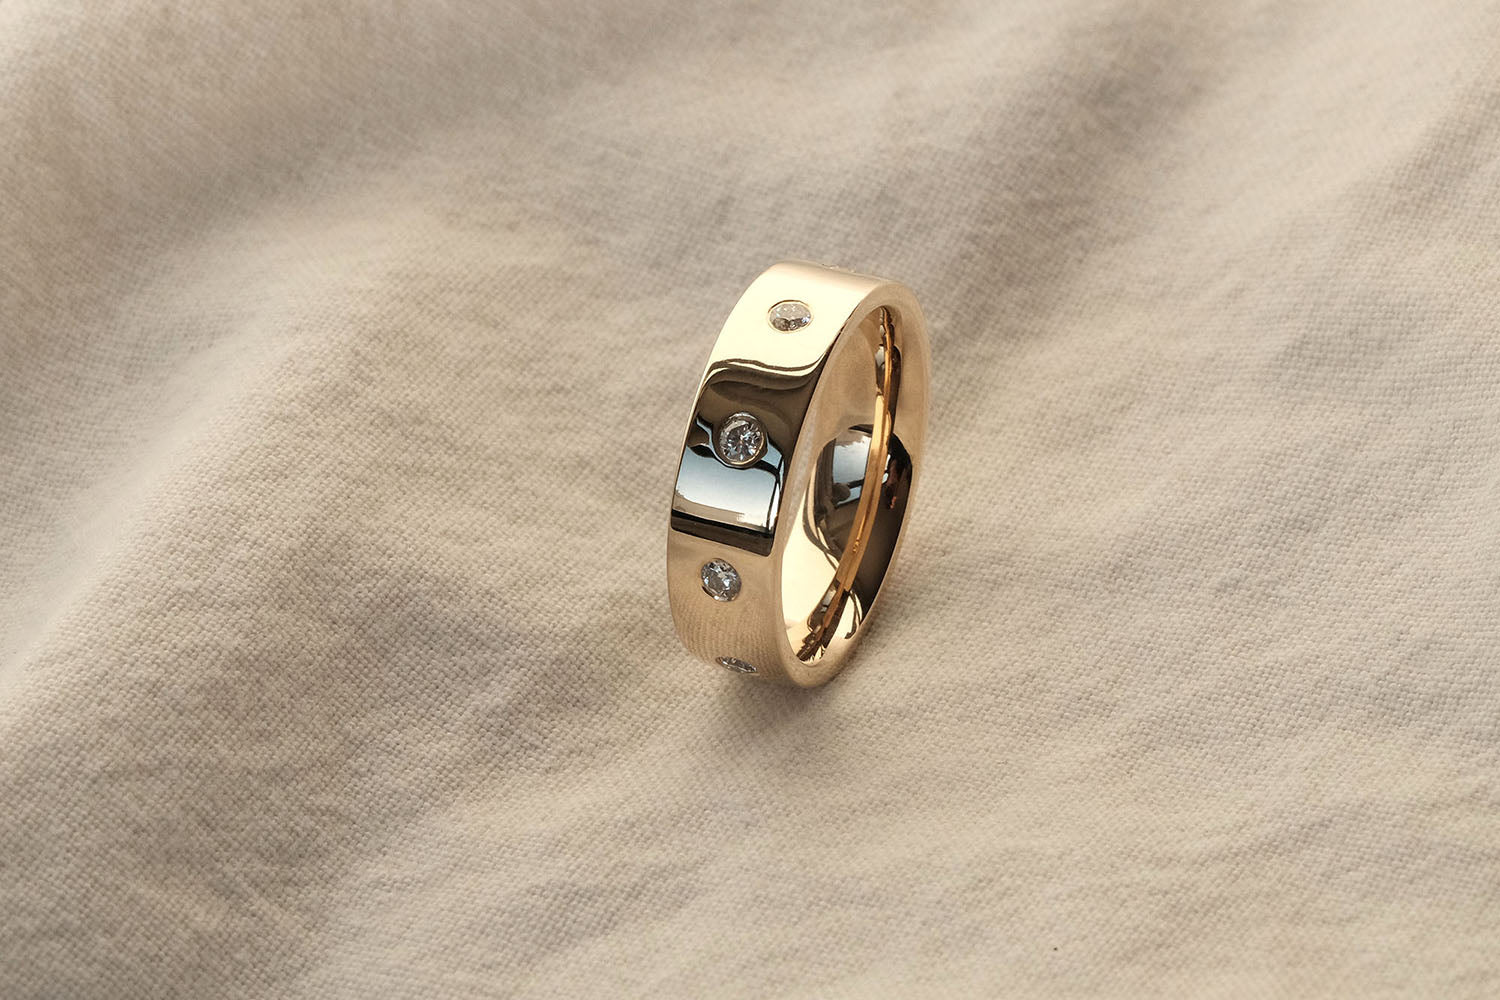 2021 New 3a Blingbling Star Paved Square Gold Rings For Female Delicate  Tarnish Free Jewelry Girl's Starry Stainless Steel Ring - Rings - AliExpress